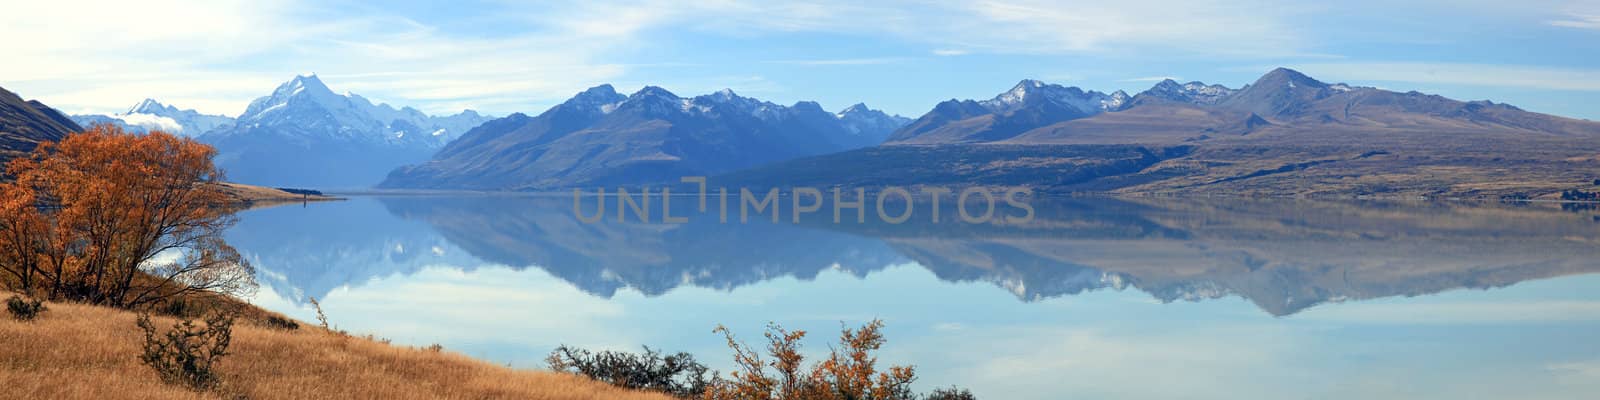 Mountain Cook Panorama New Zealand by vichie81